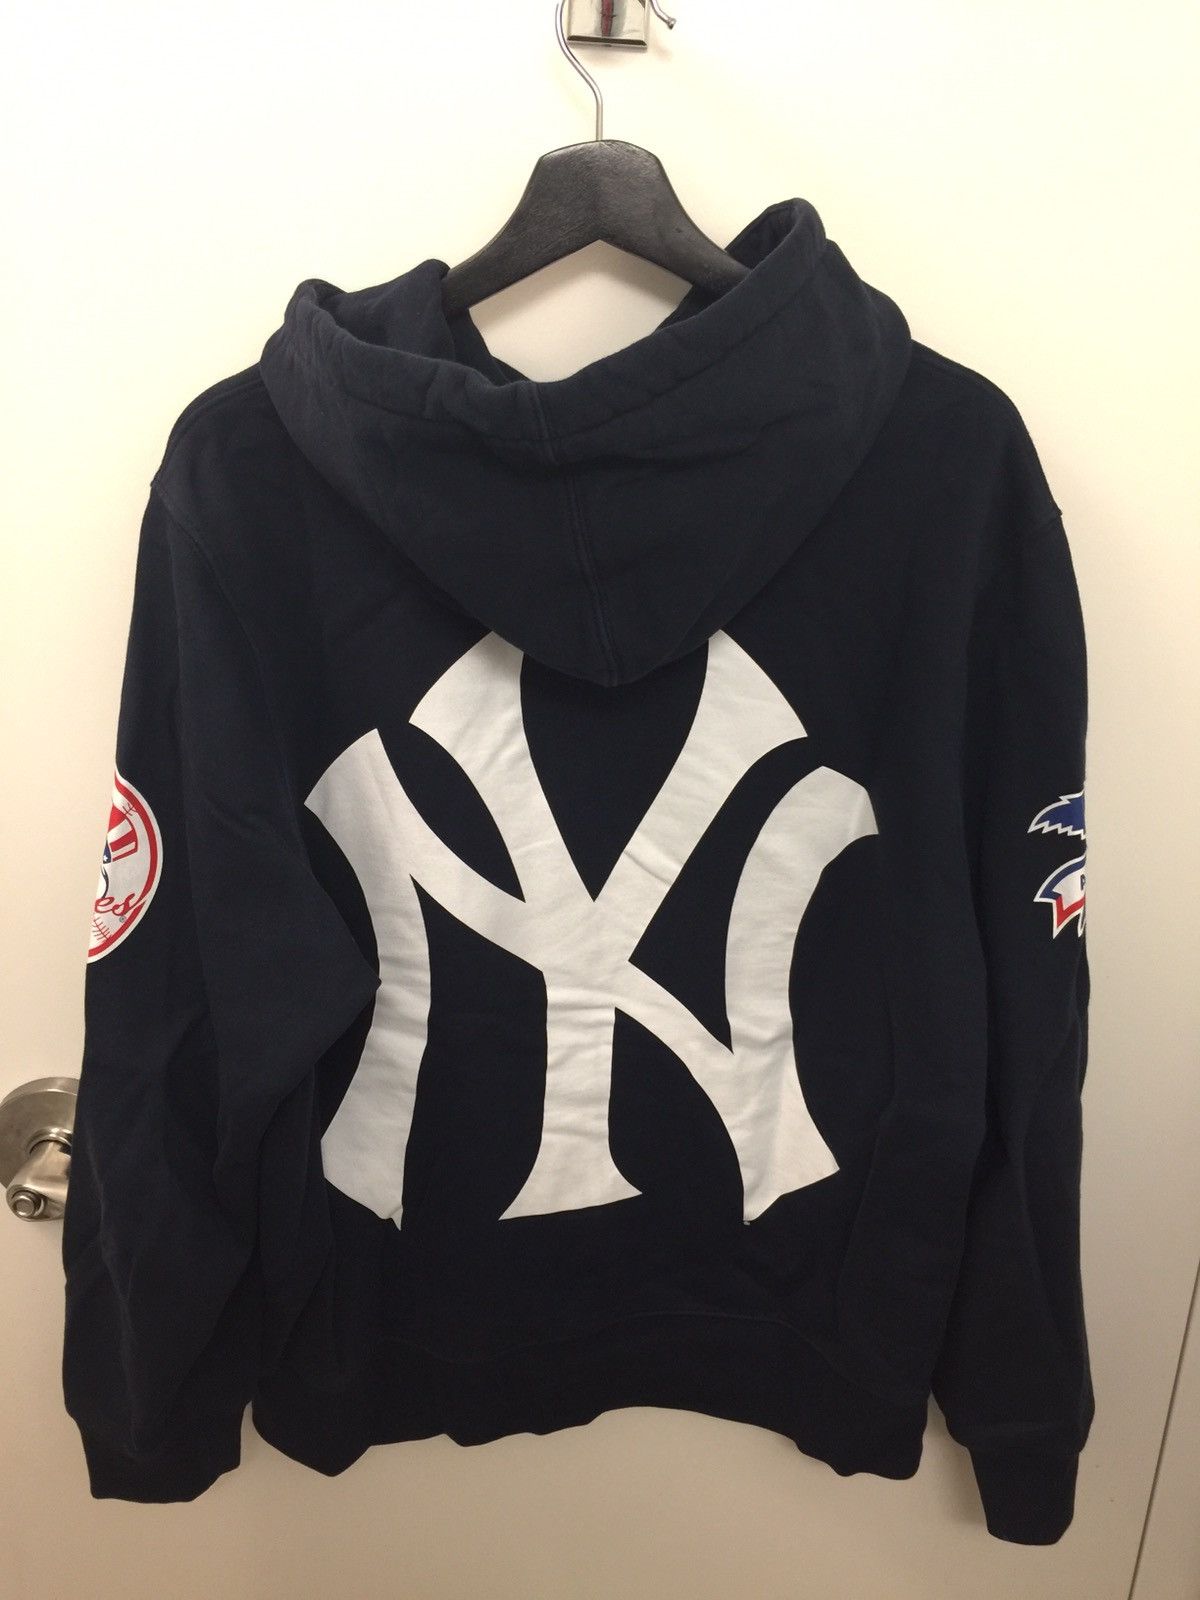 Supreme Supreme x NY Yankees Hoodie in Navy Size US M / EU 48-50 / 2 - 2 Preview